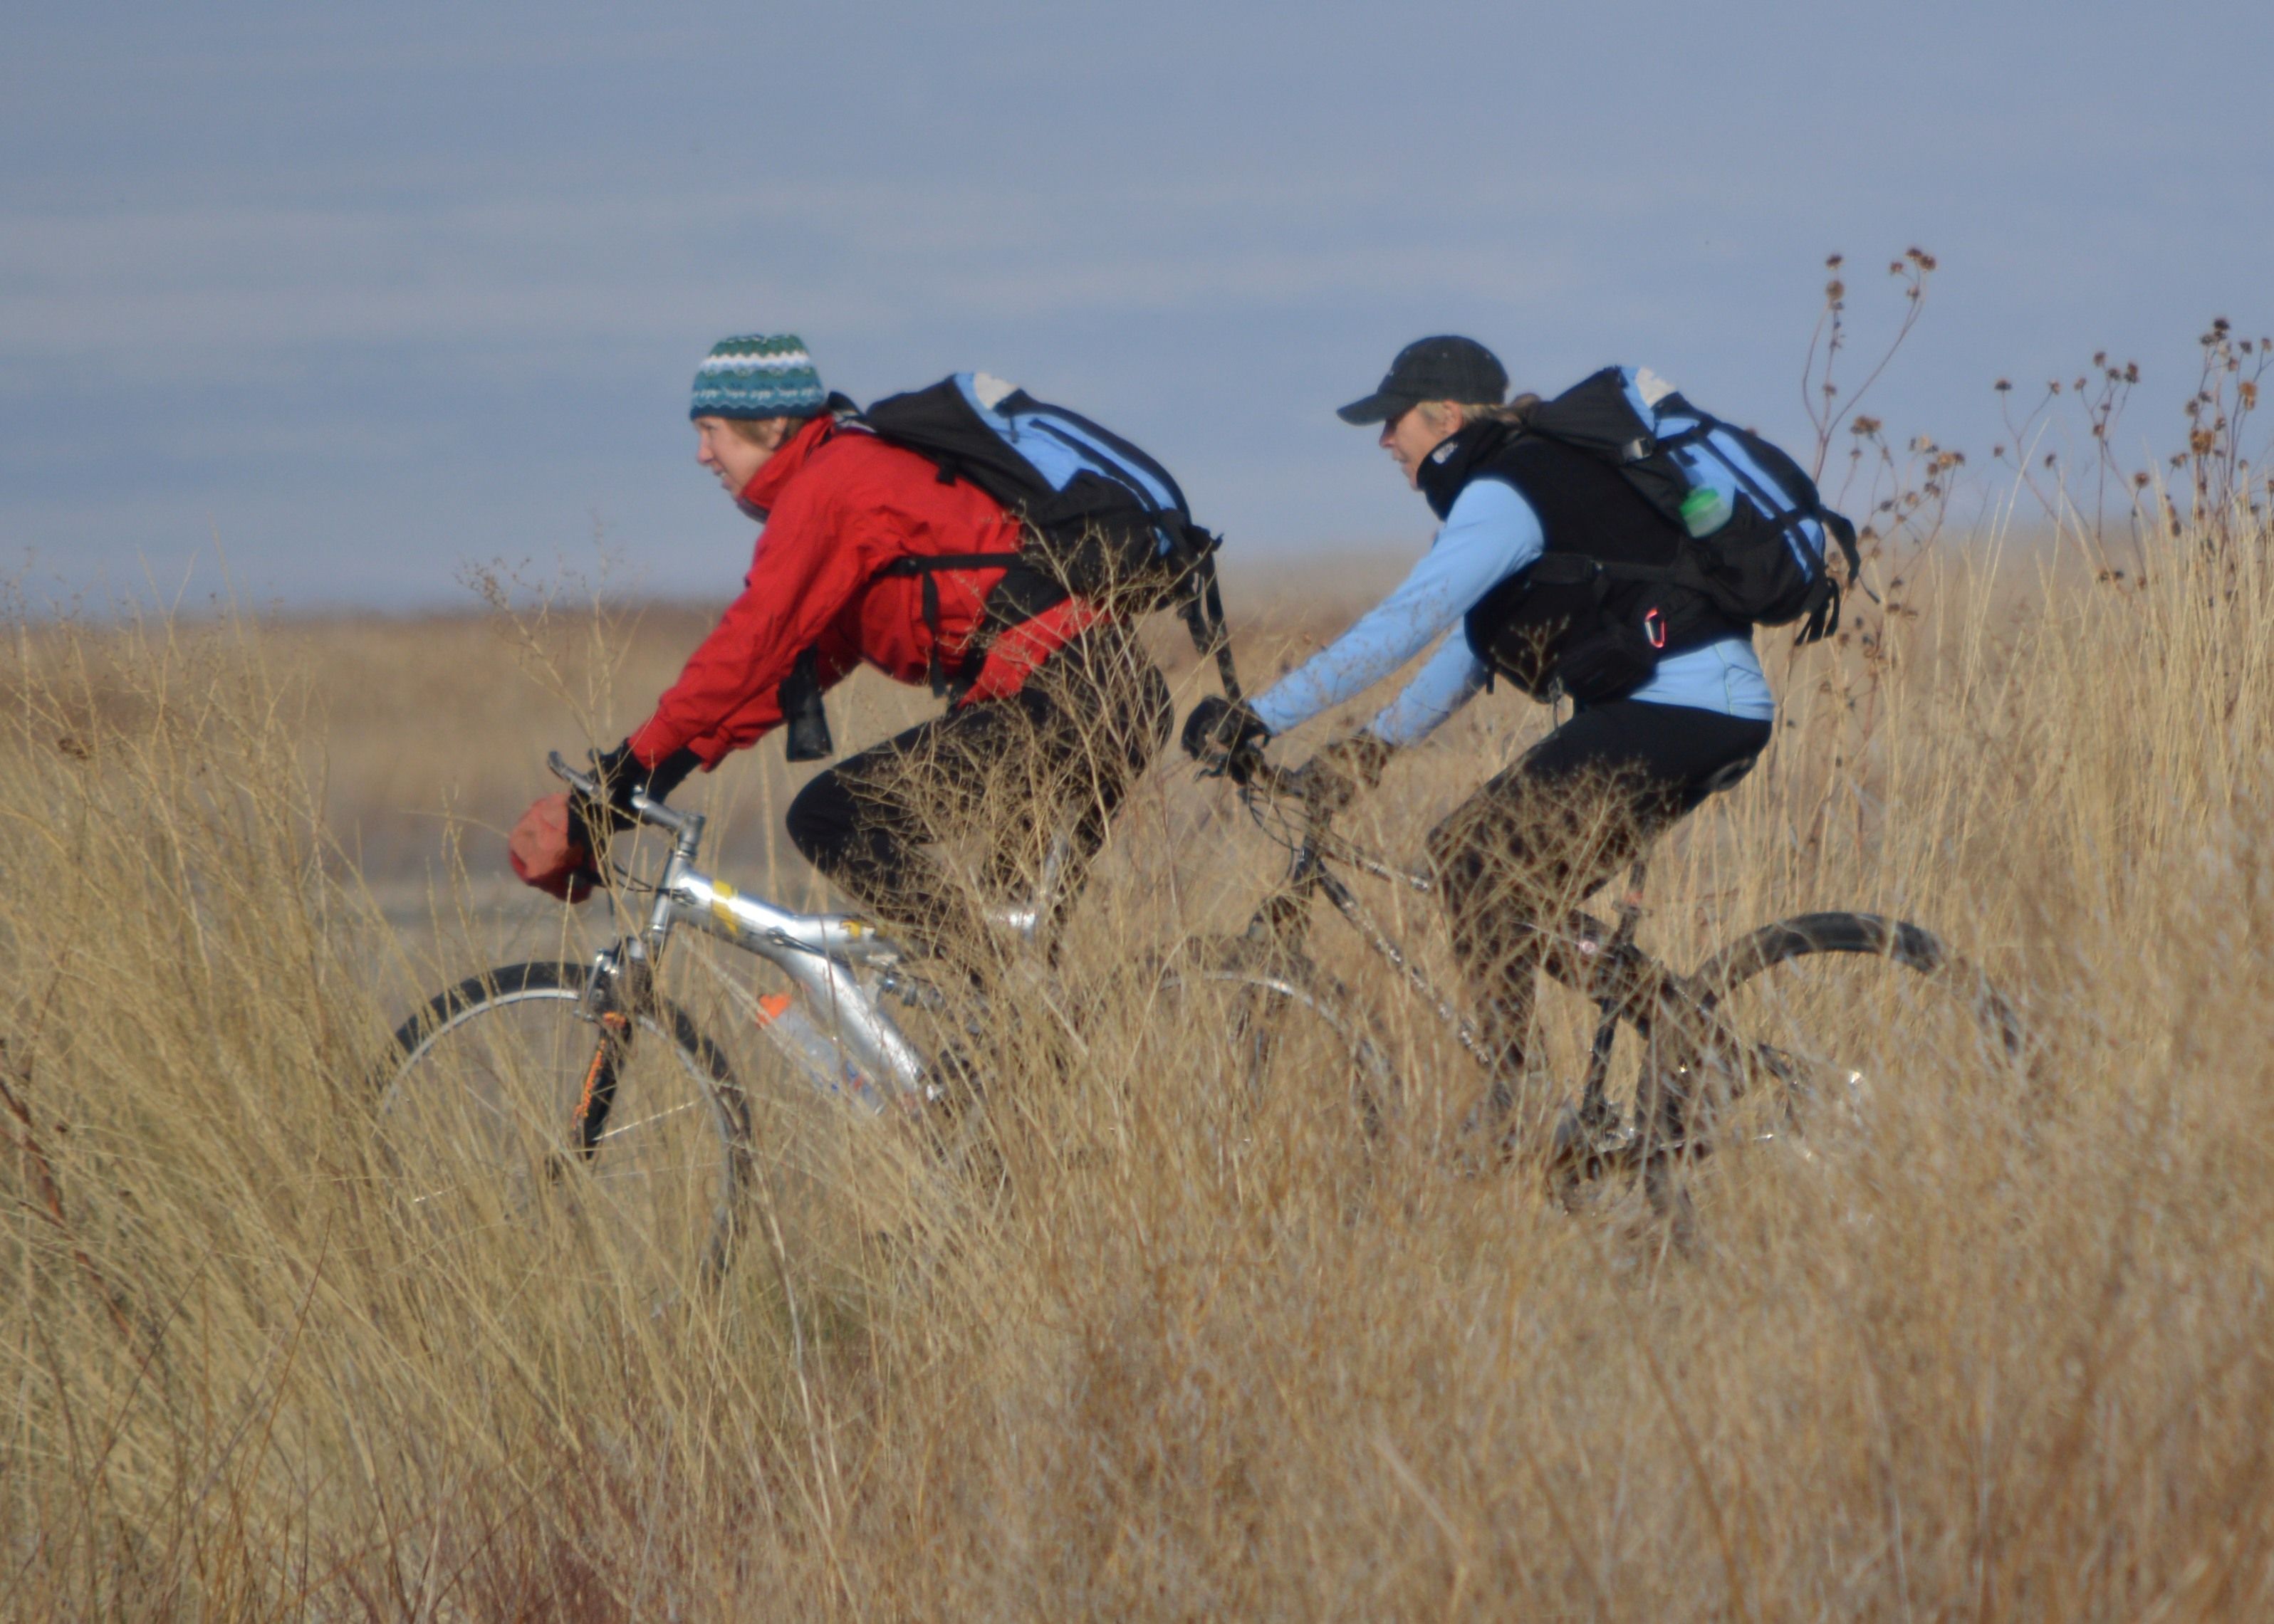 Two people in helmets ride bikes across a field with high grass.